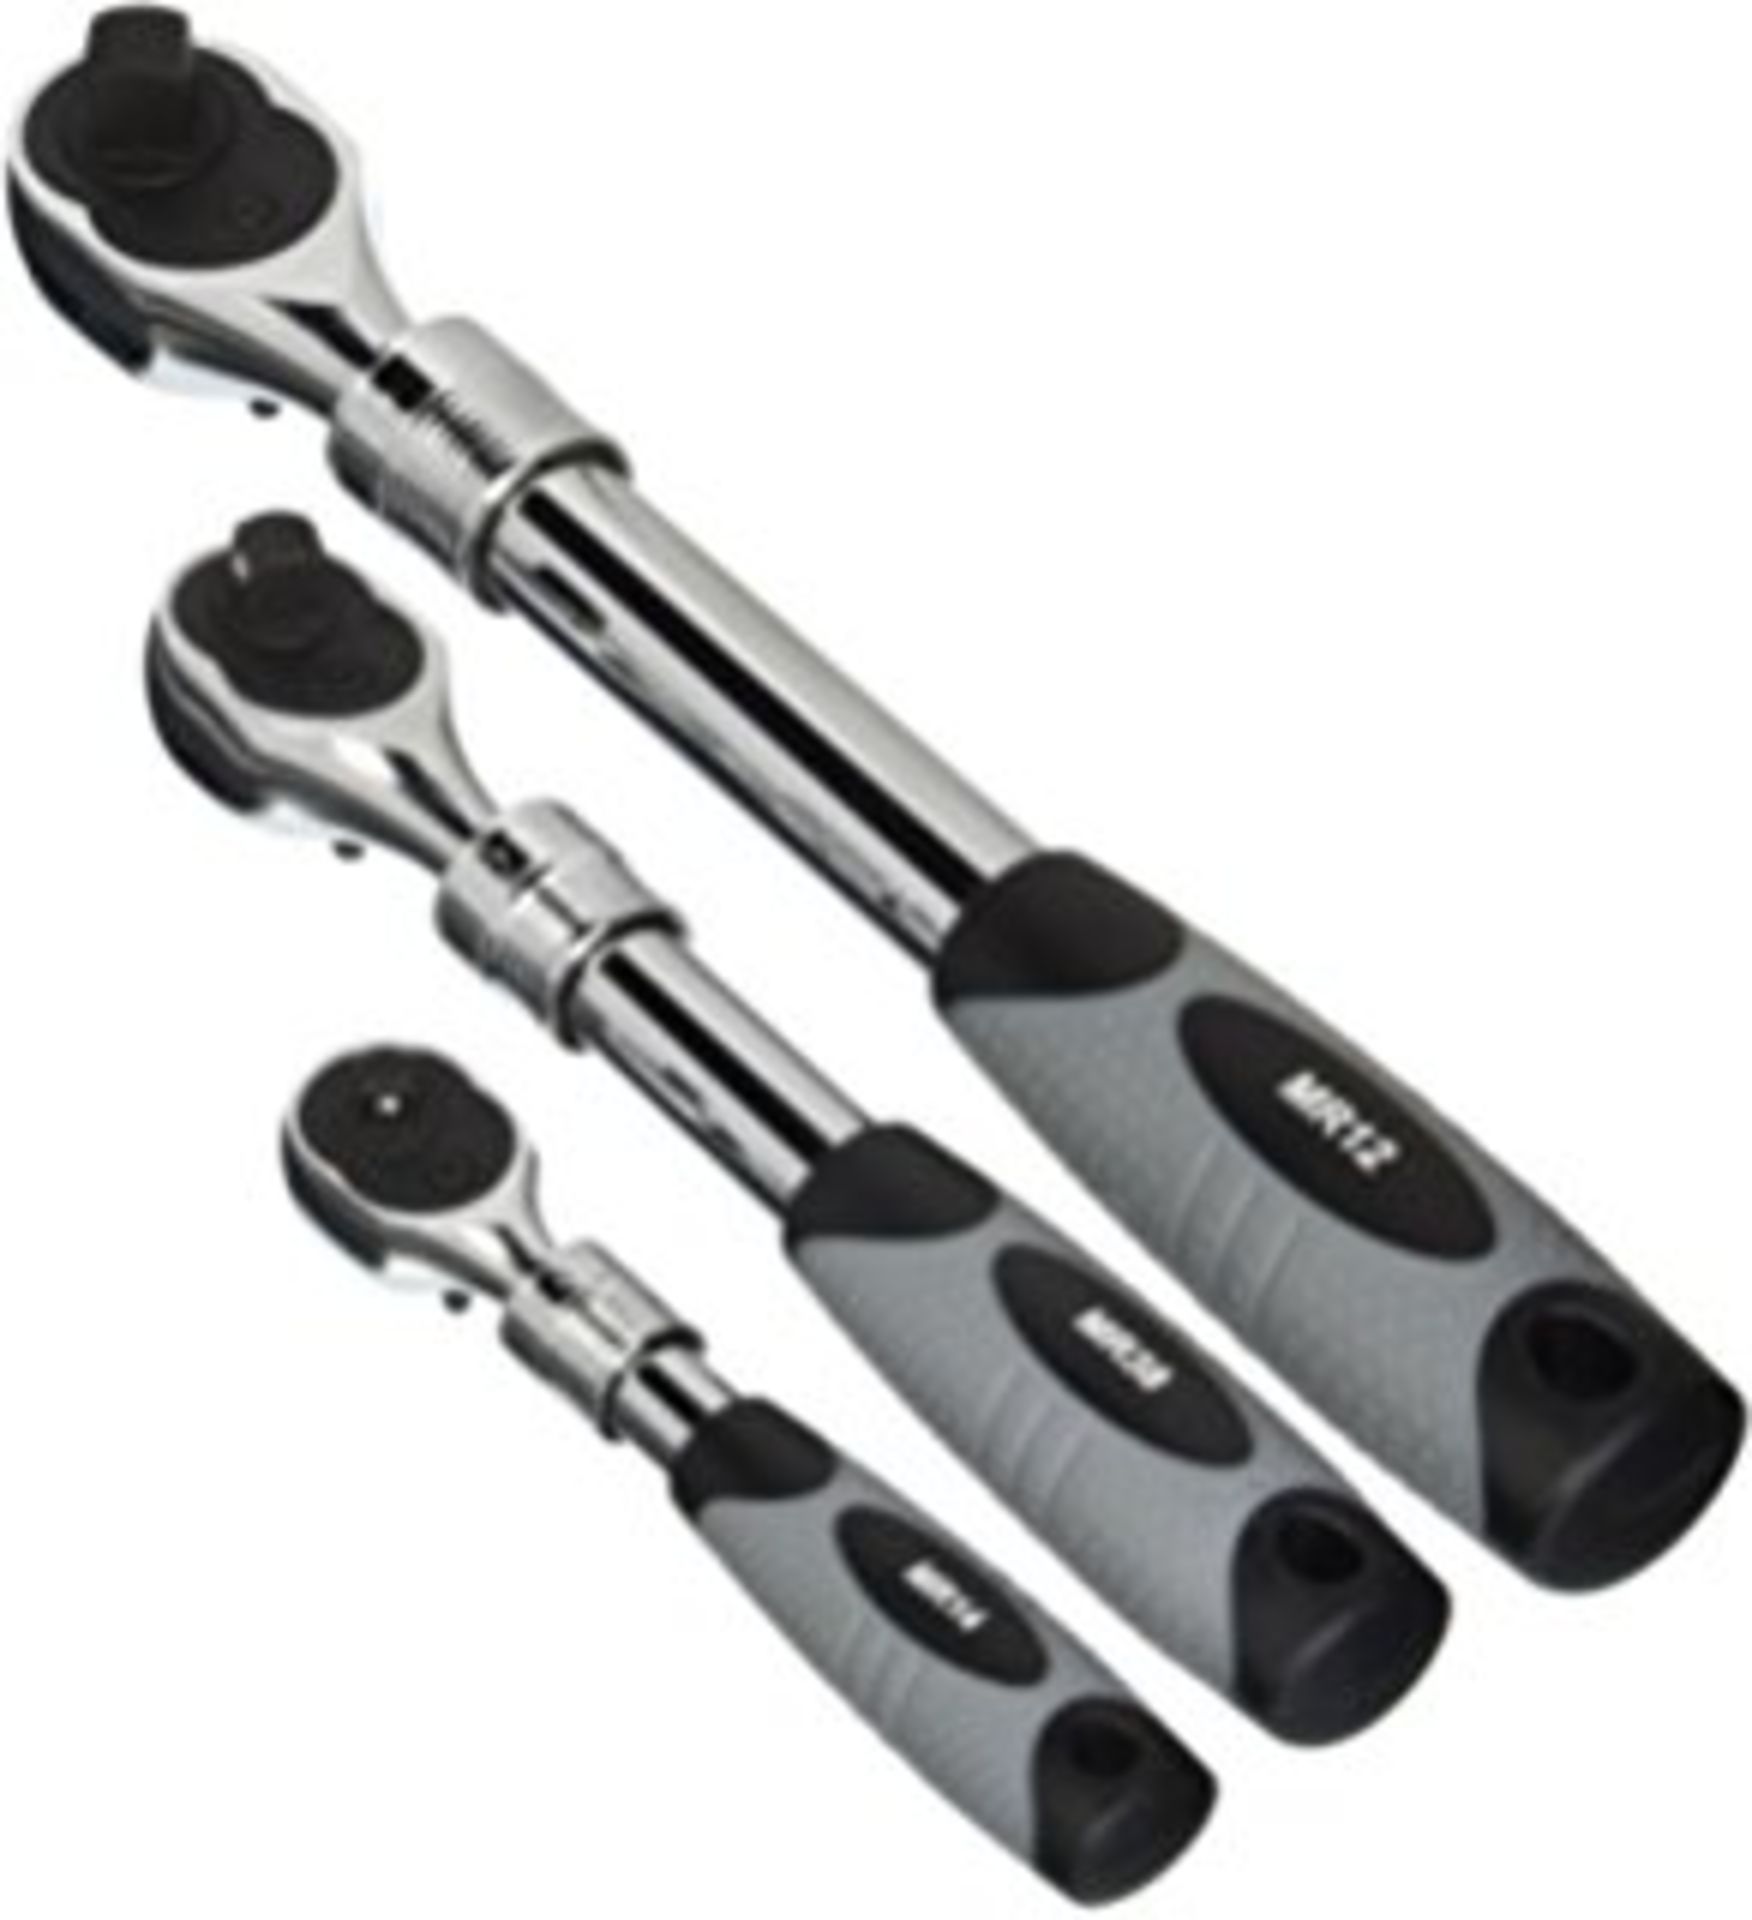 V *TRADE QTY* Brand New Three Piece 1/4" 3/8" and 1/2" Drive Extendable Ratchet Set (Please note